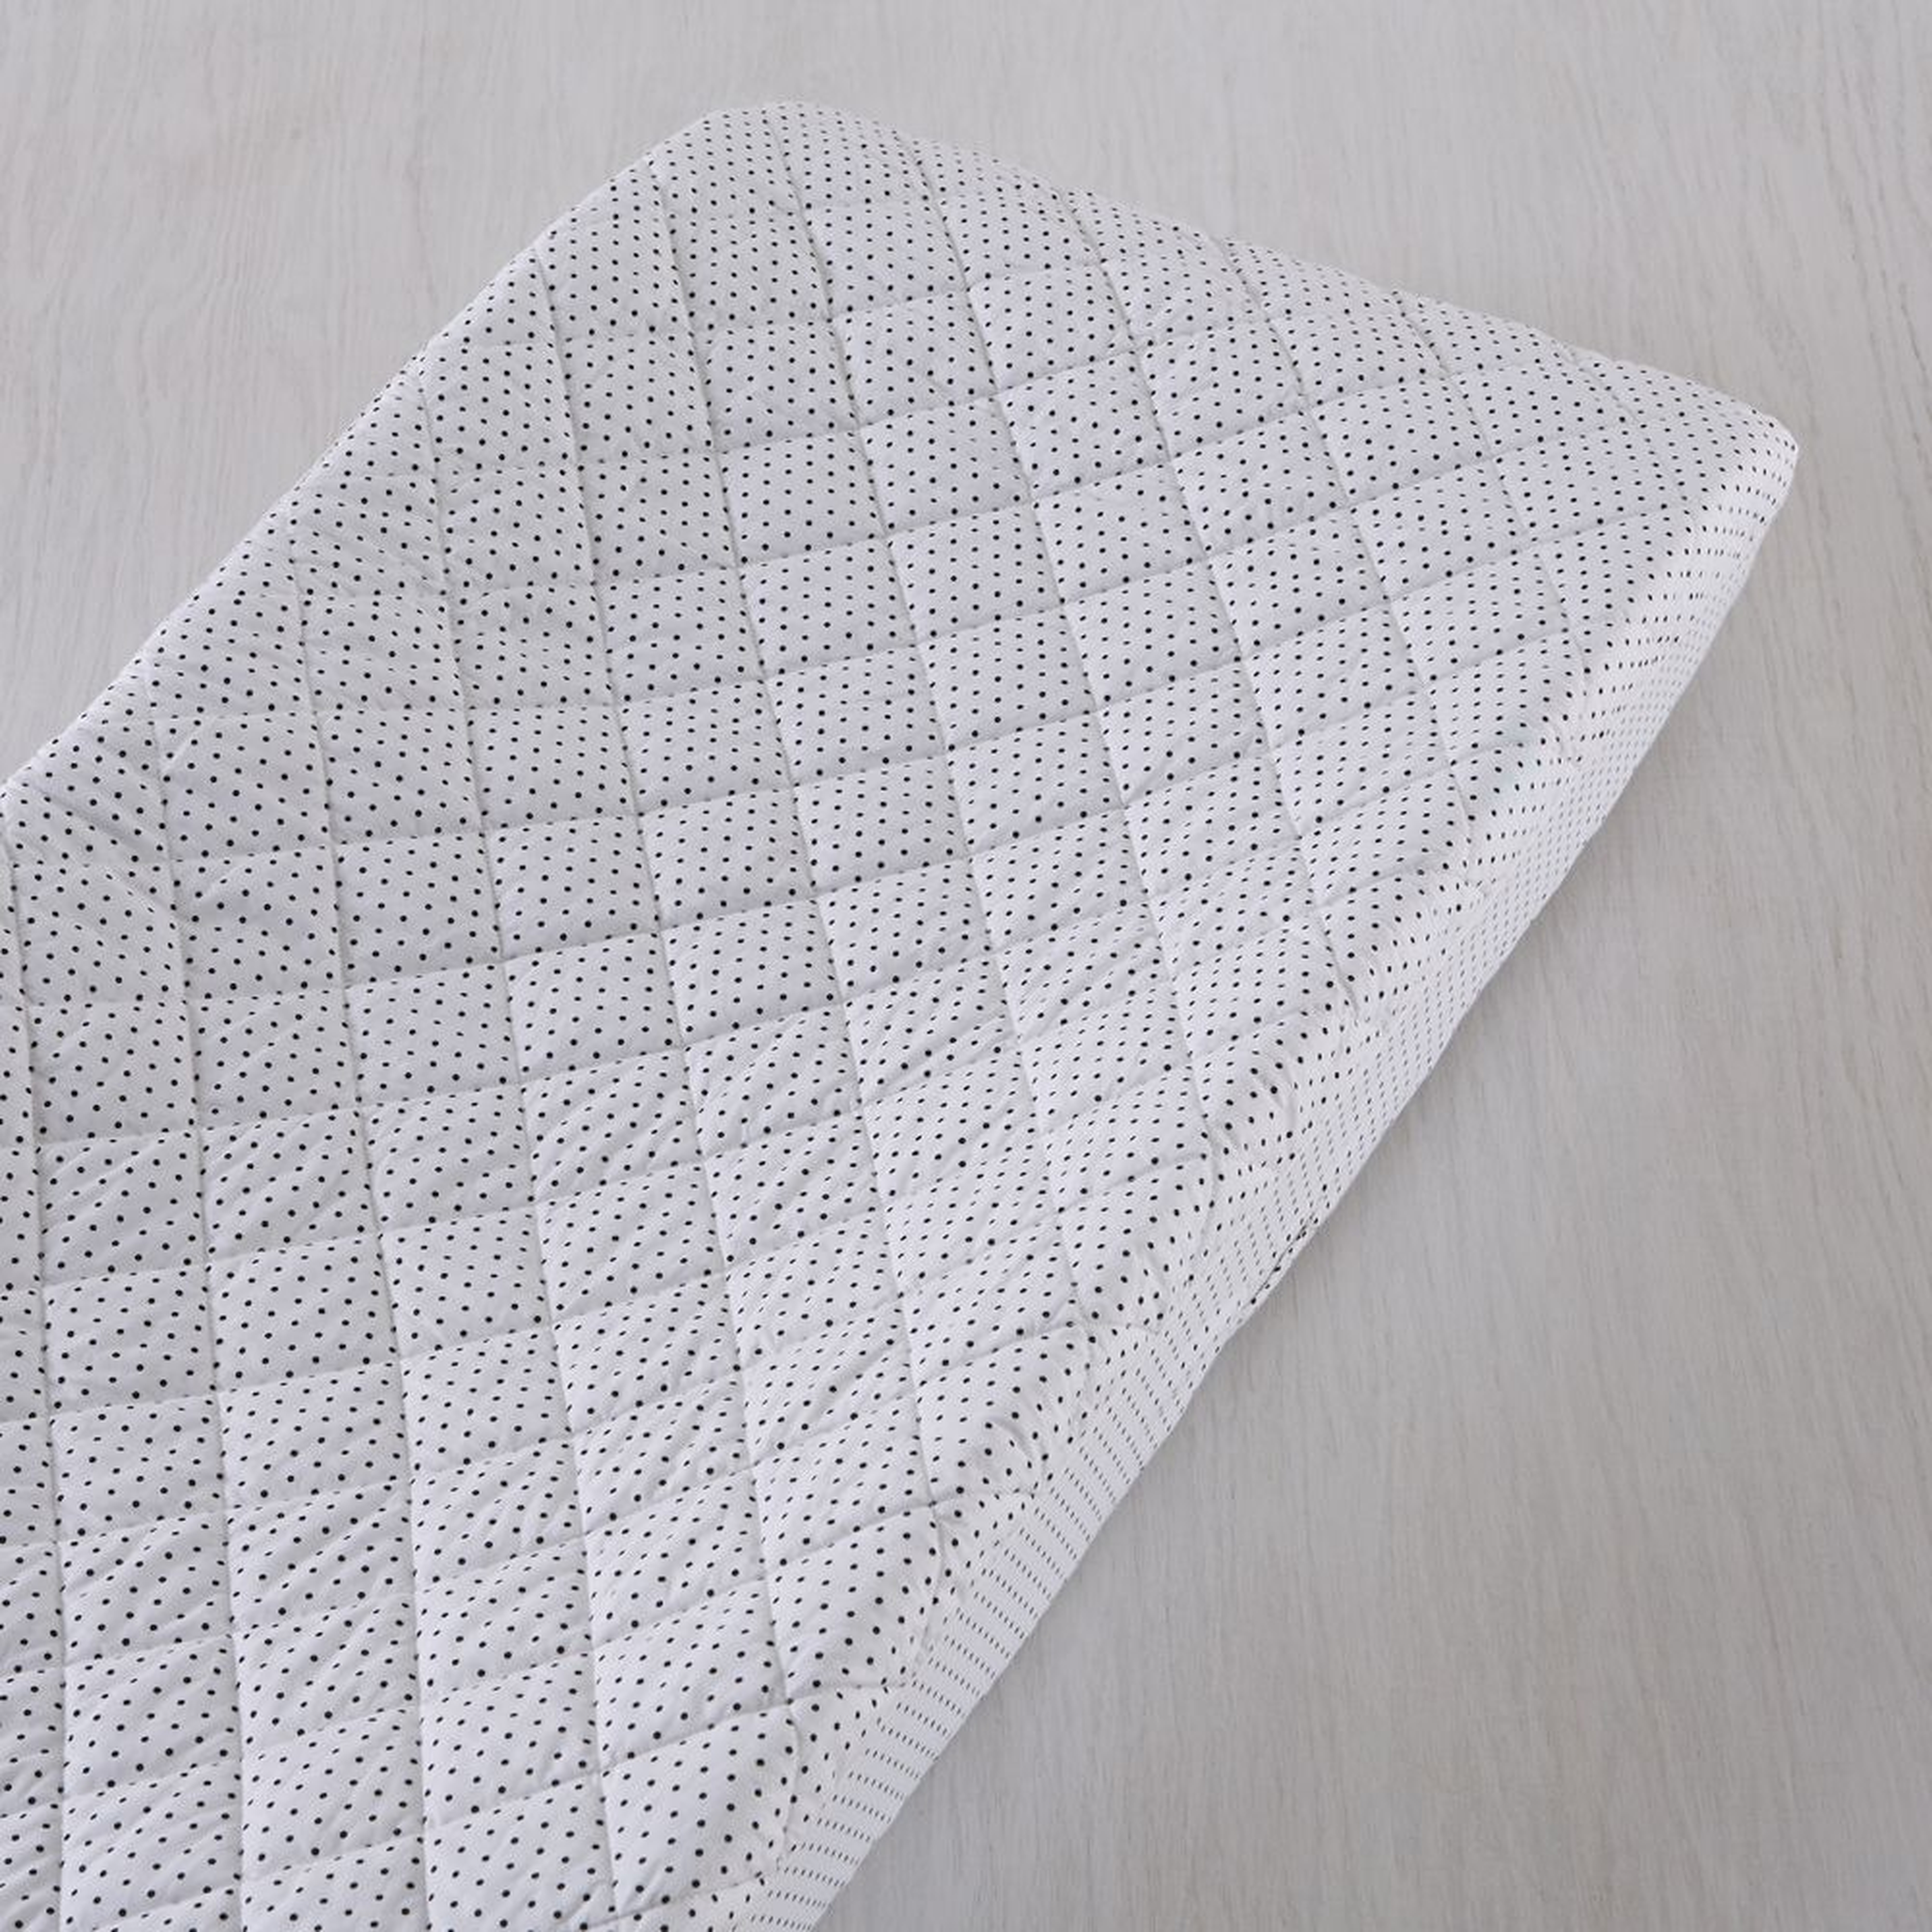 Swiss Dot Changing Pad Cover - Crate and Barrel